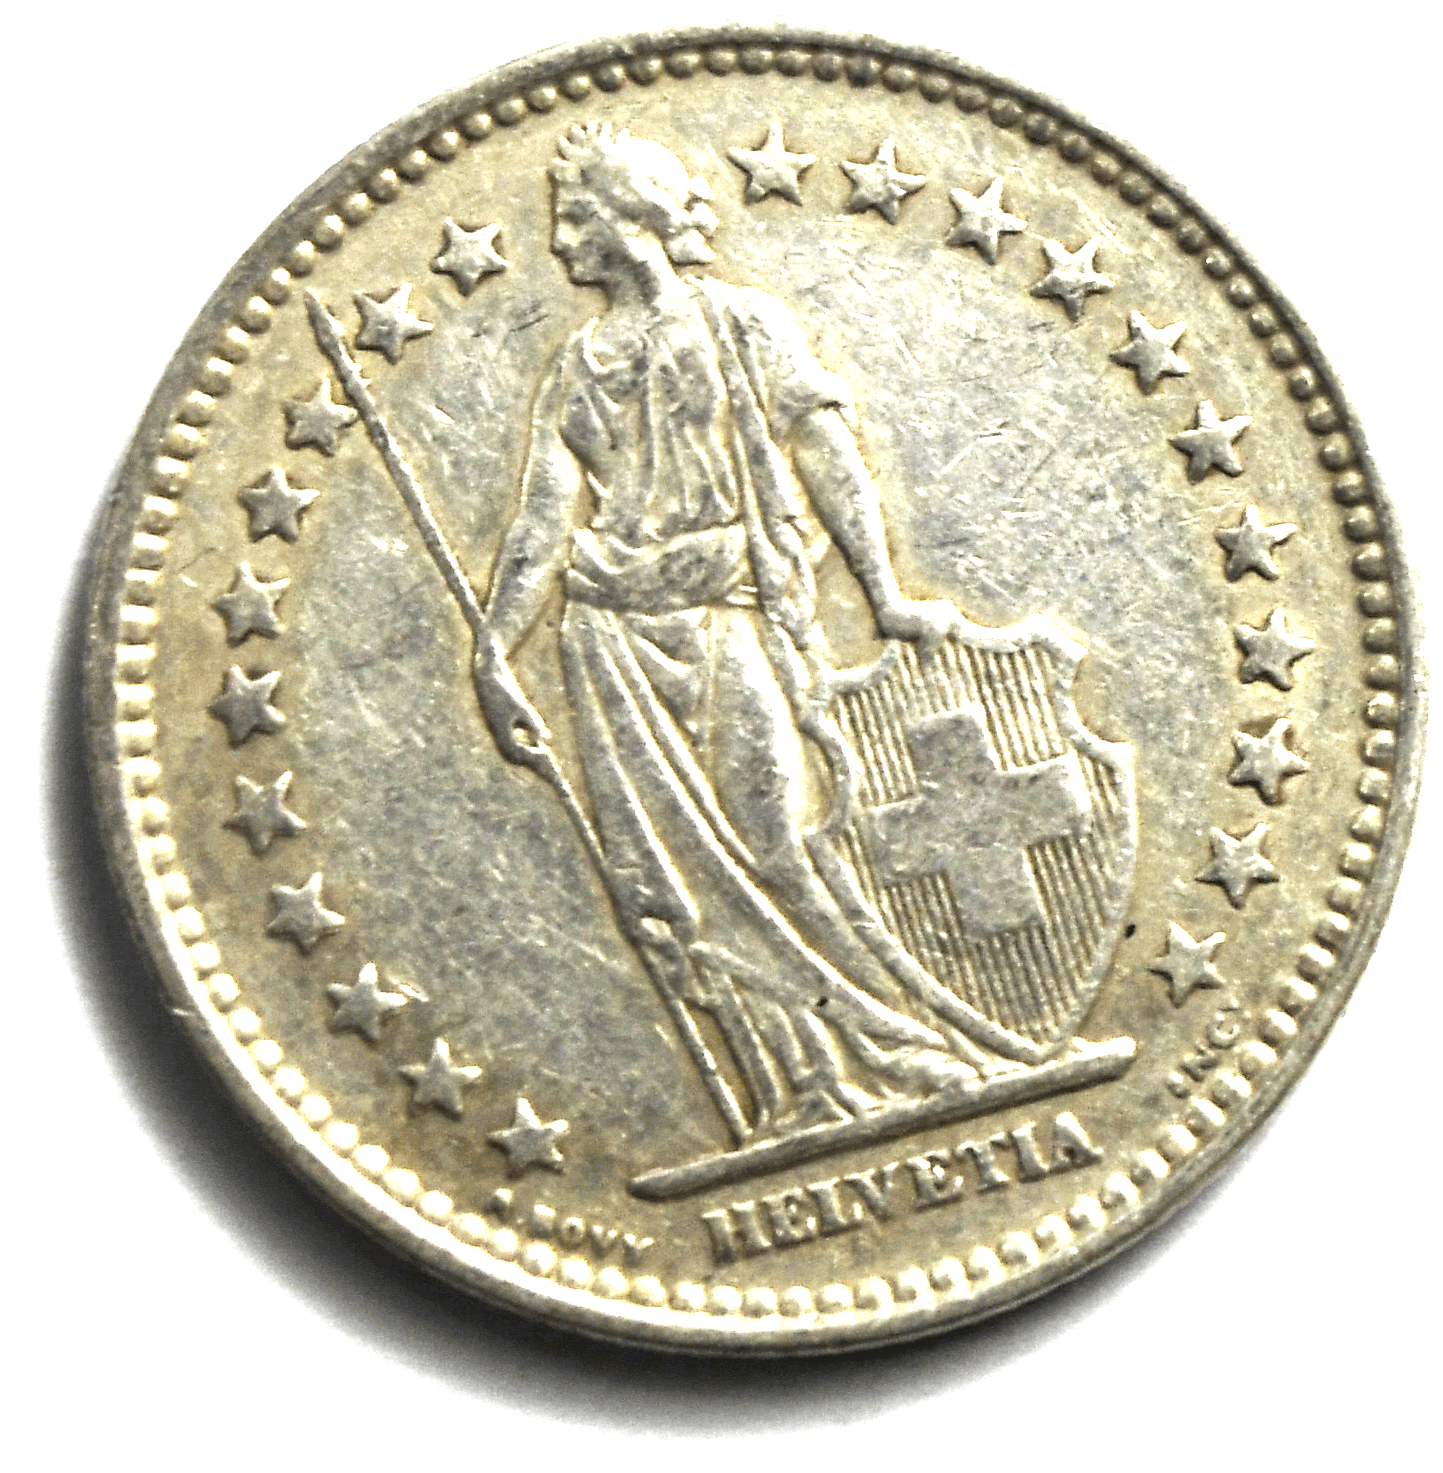 1921 B Switzerland Two 2 Francs KM# 24 Silver Coin